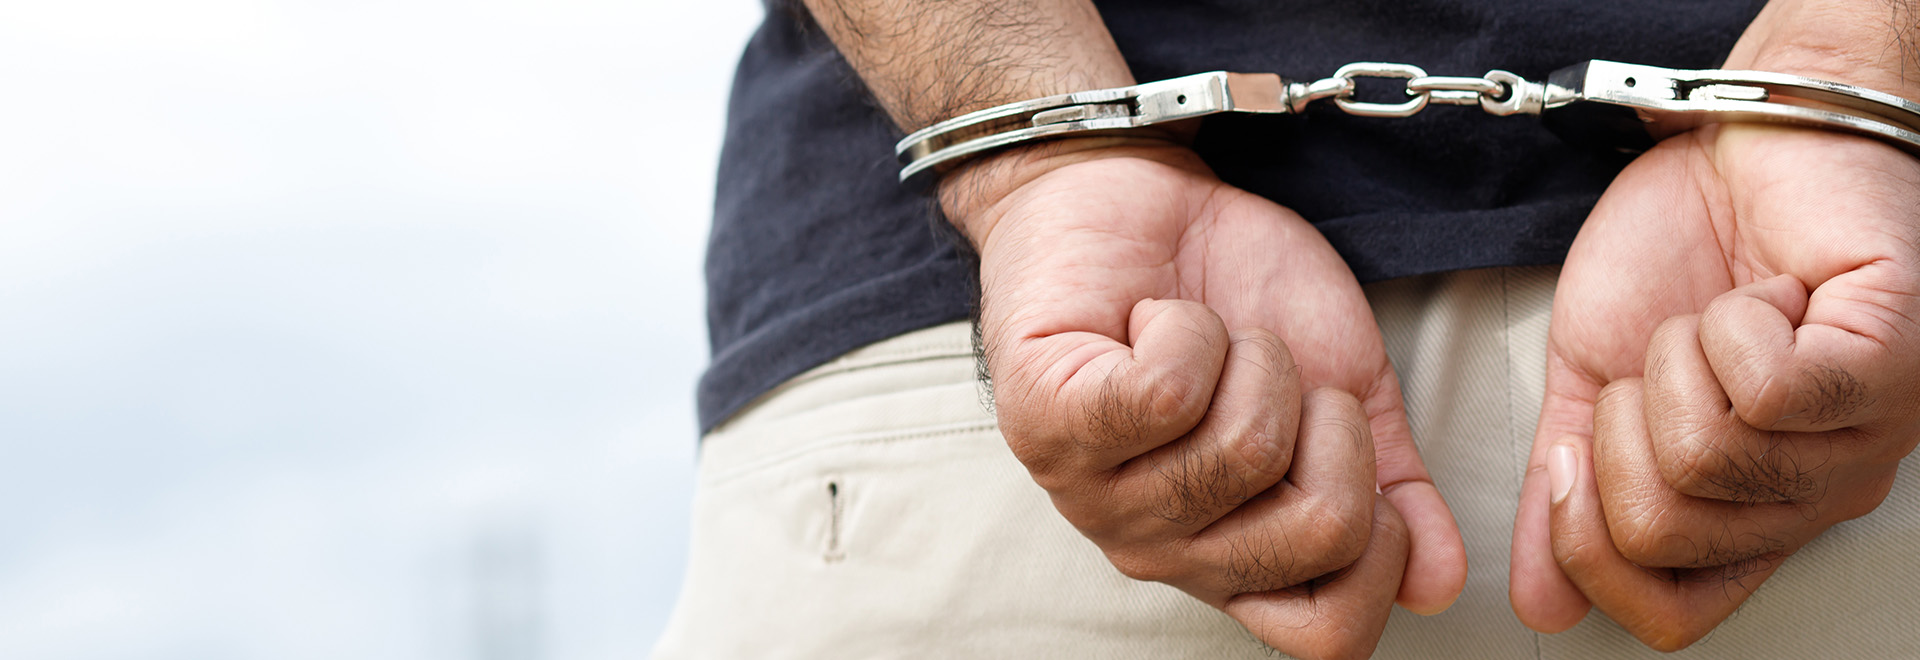 Arrest the offender Prison male criminal standing in handcuffs with hands behind back